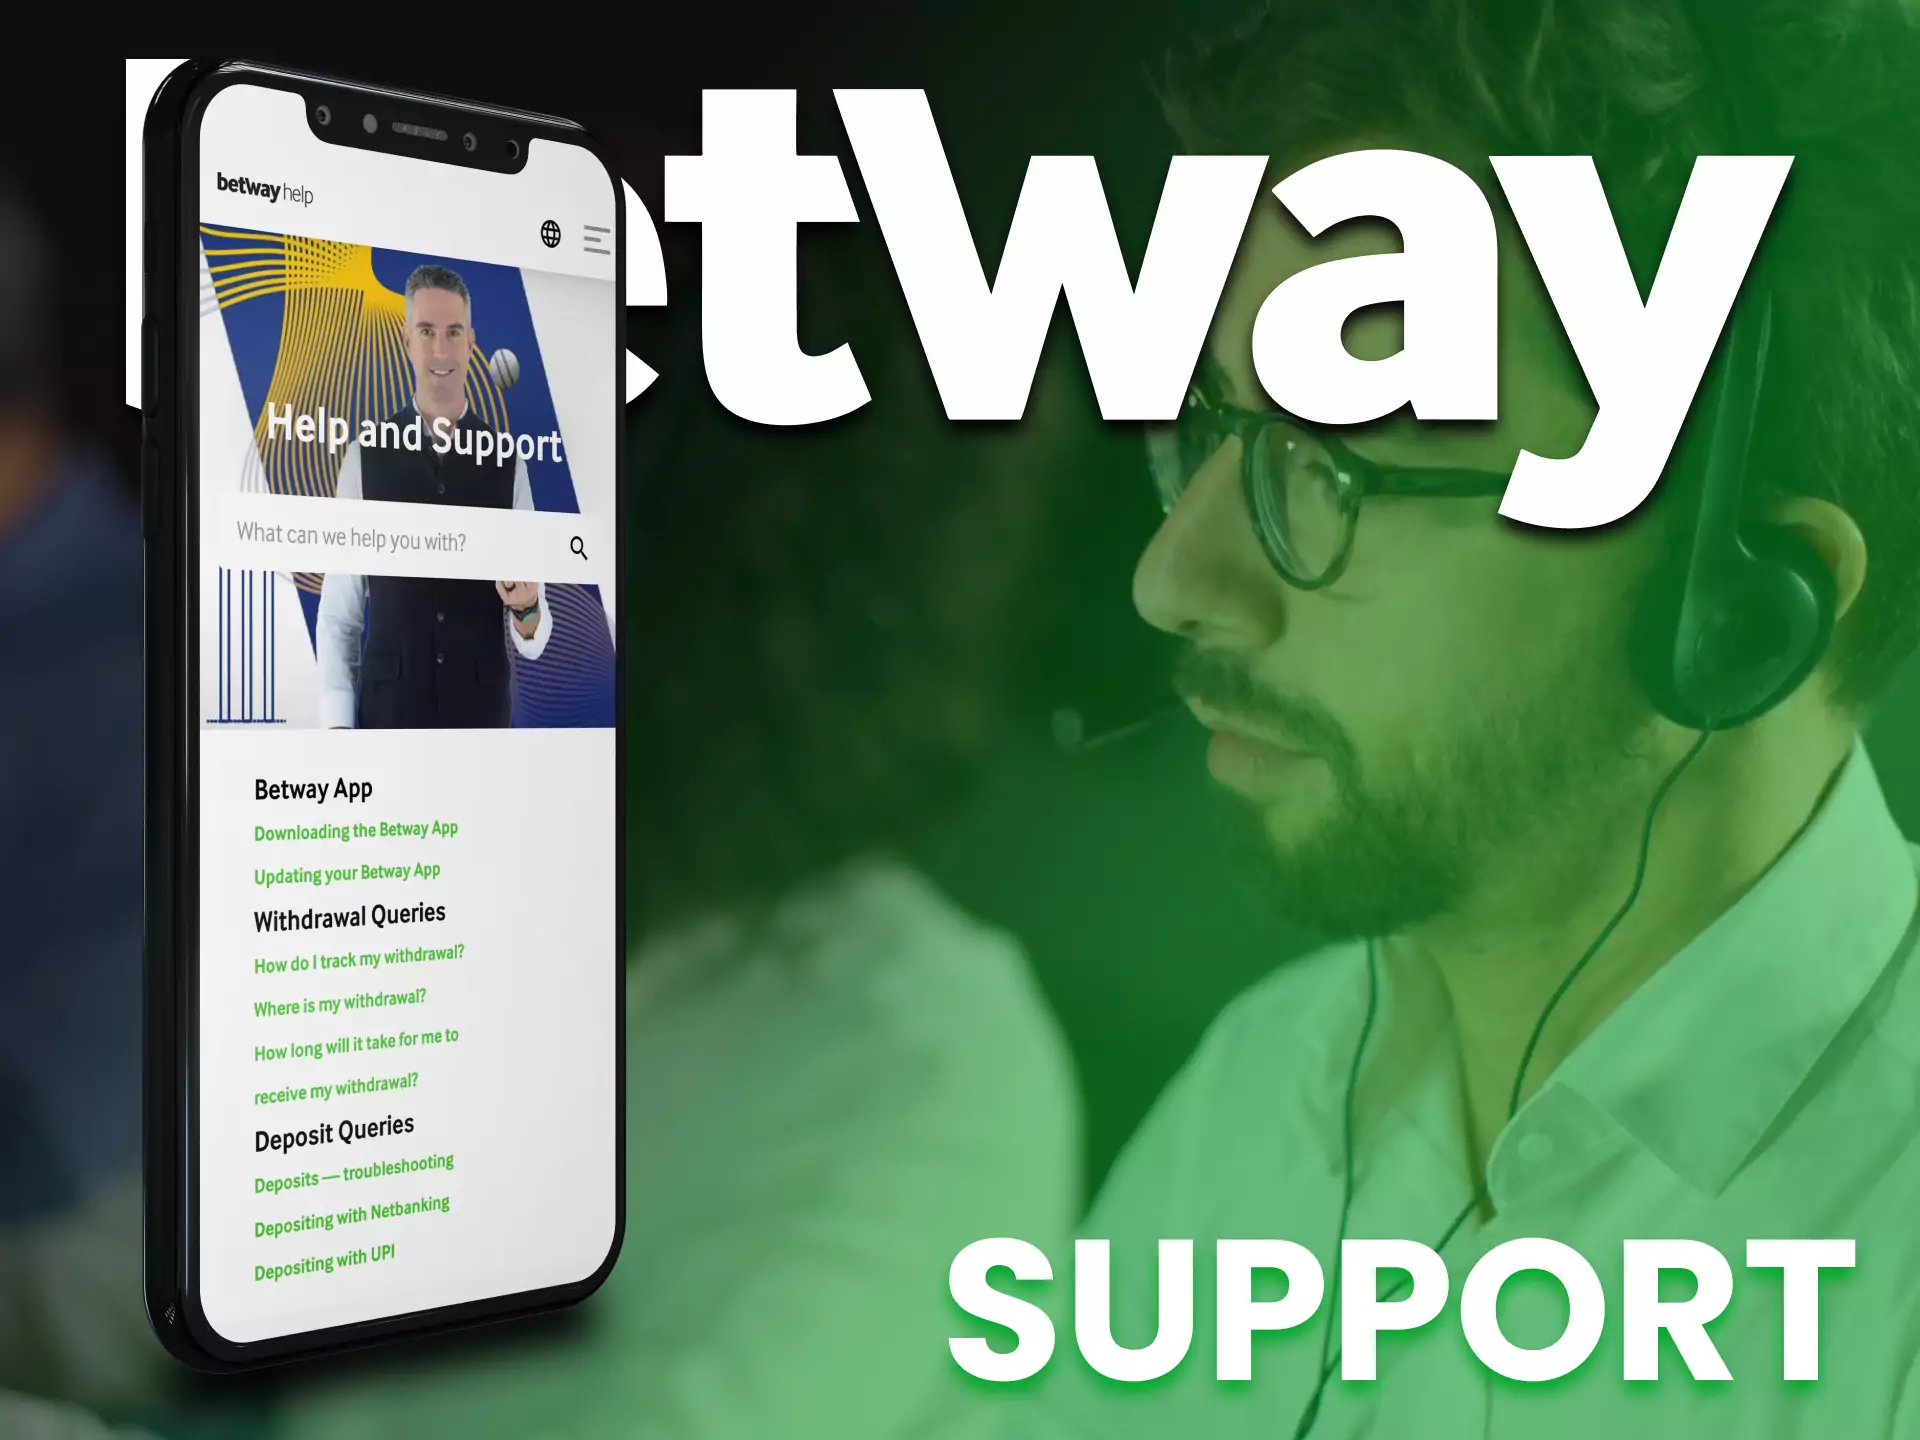 In the Betway app you can always count on the support.